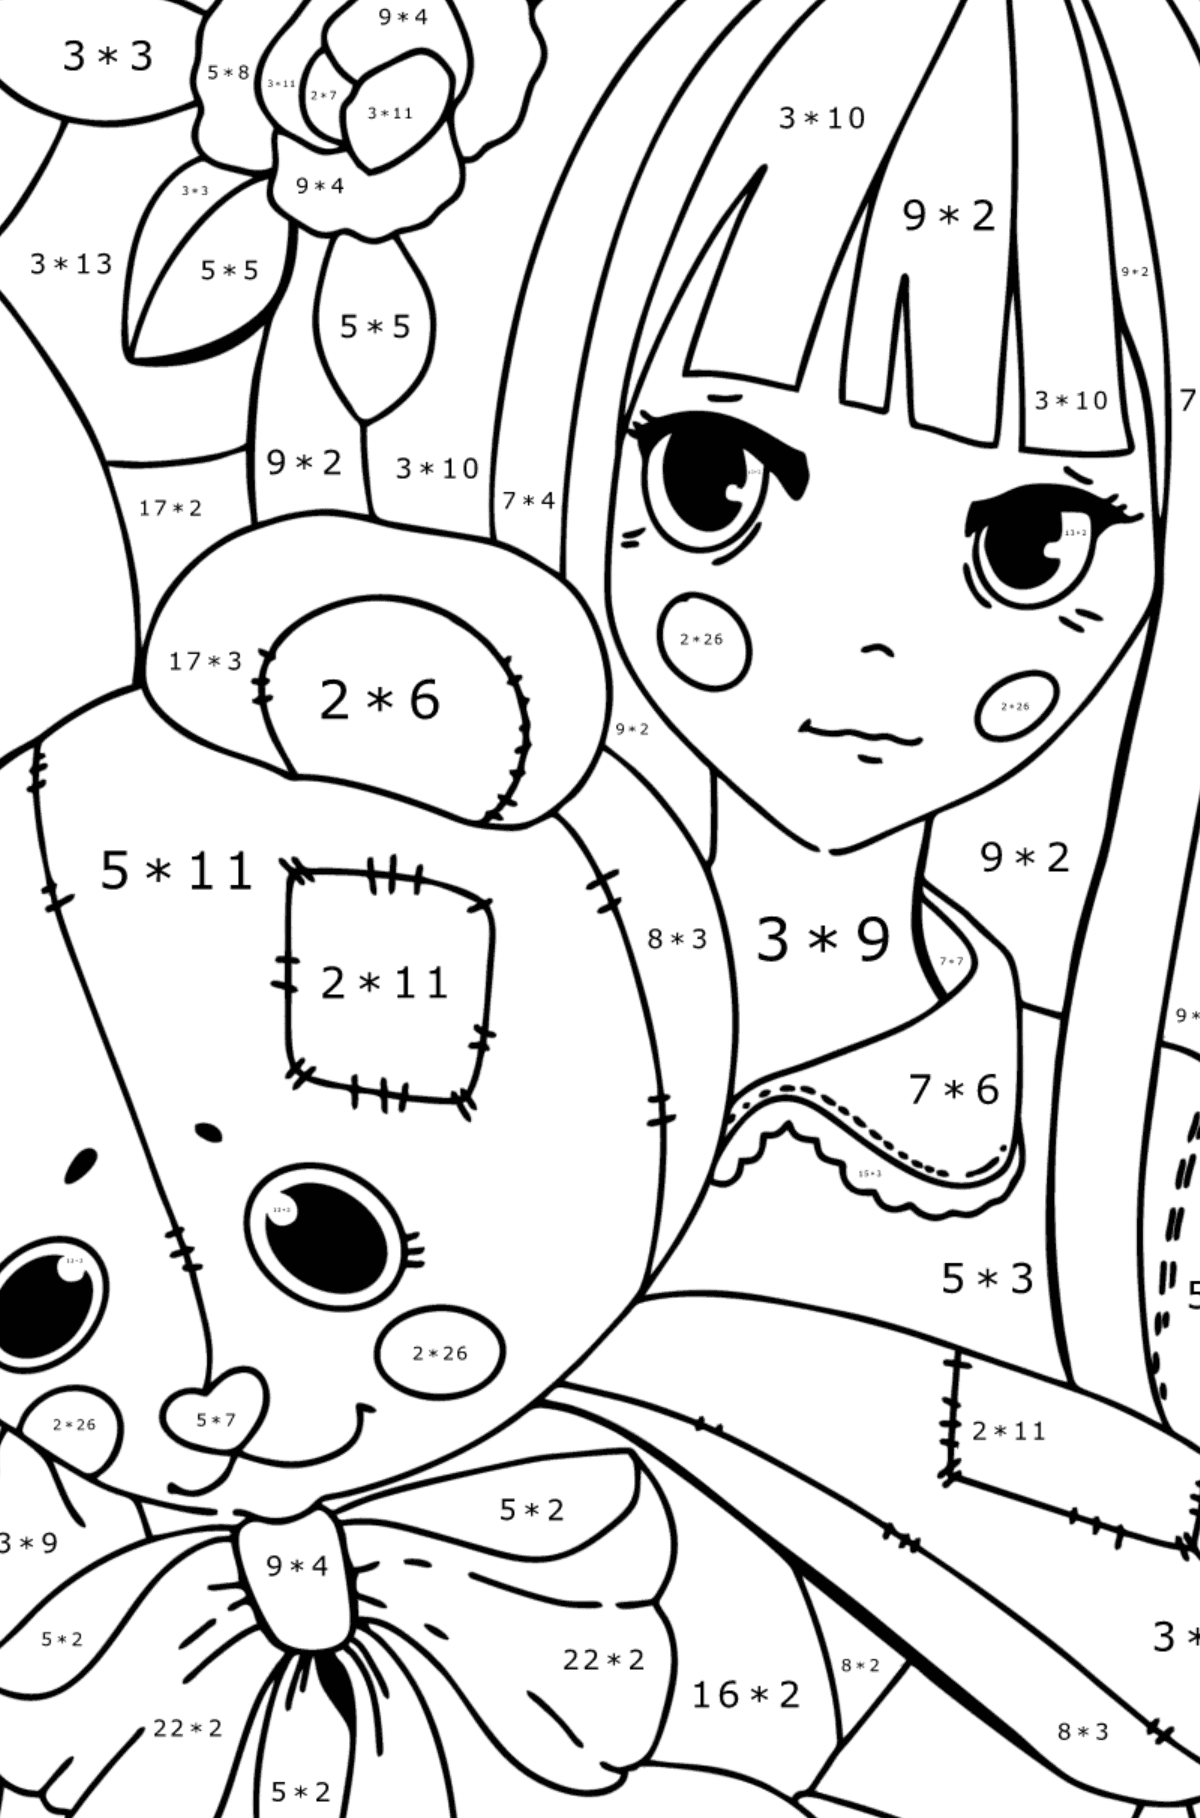 Anime girl coloring page holding a teddy - Math Coloring - Multiplication for Kids